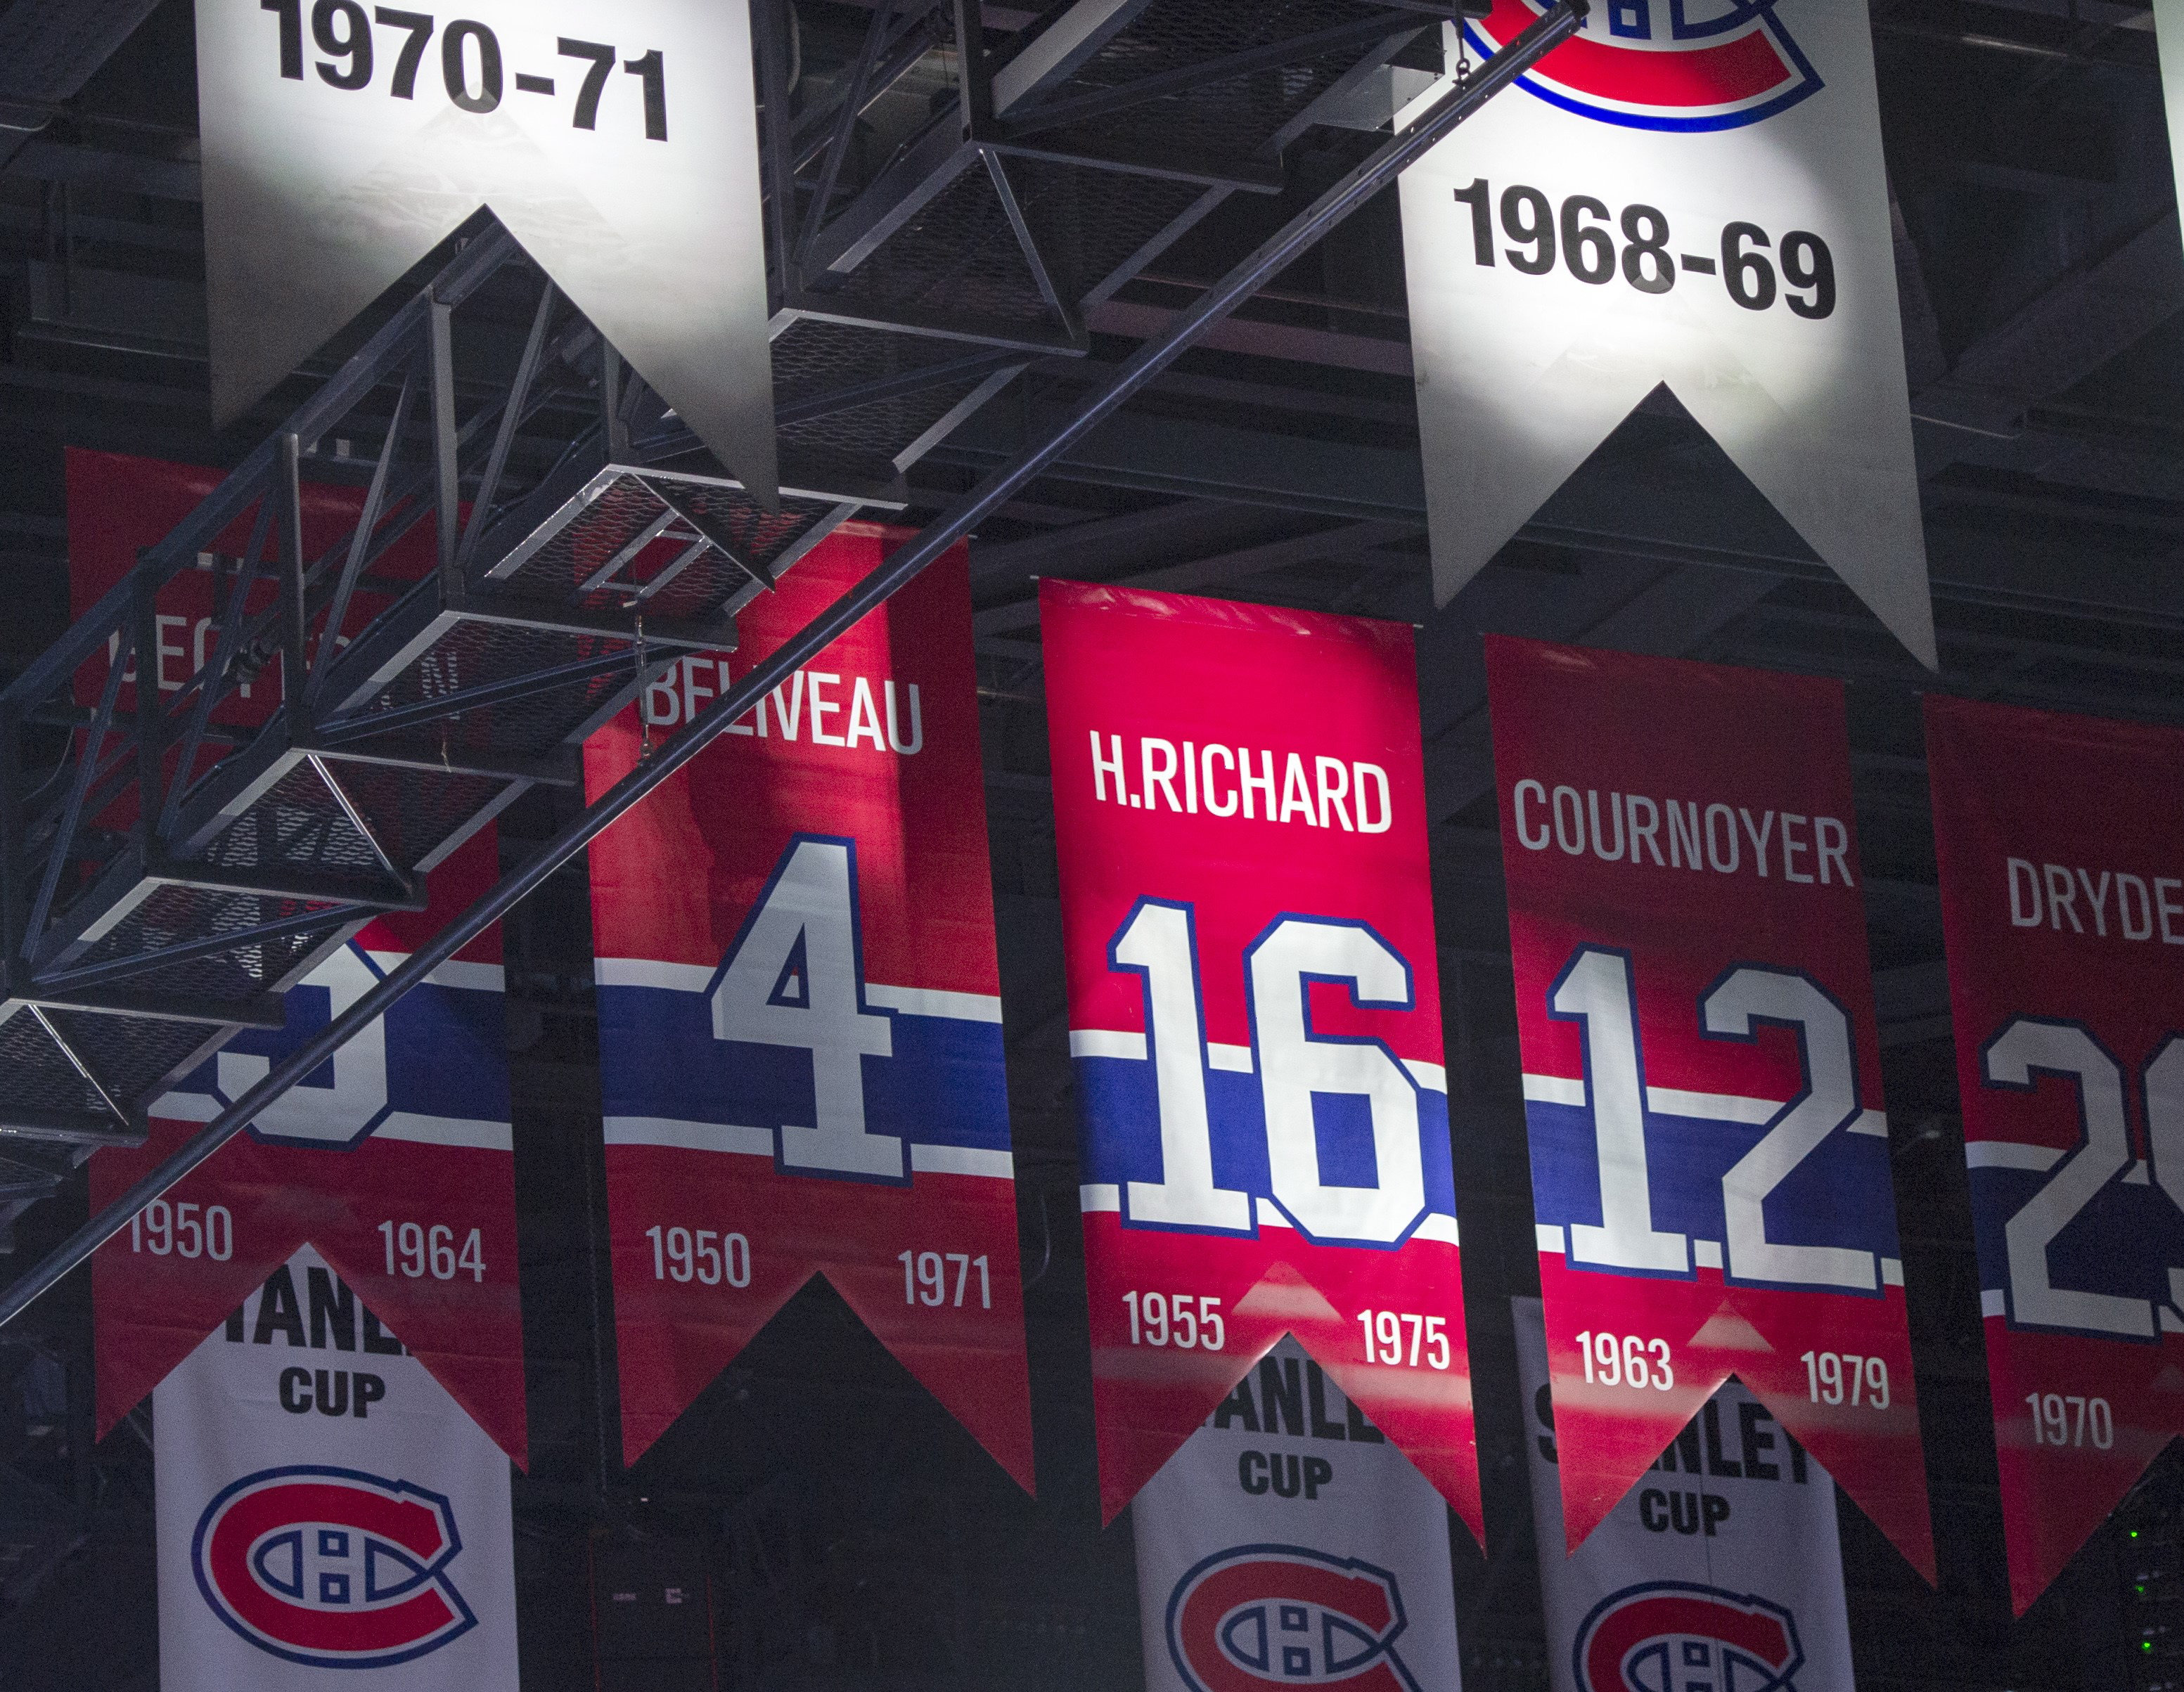 retired jersey numbers montreal canadiens